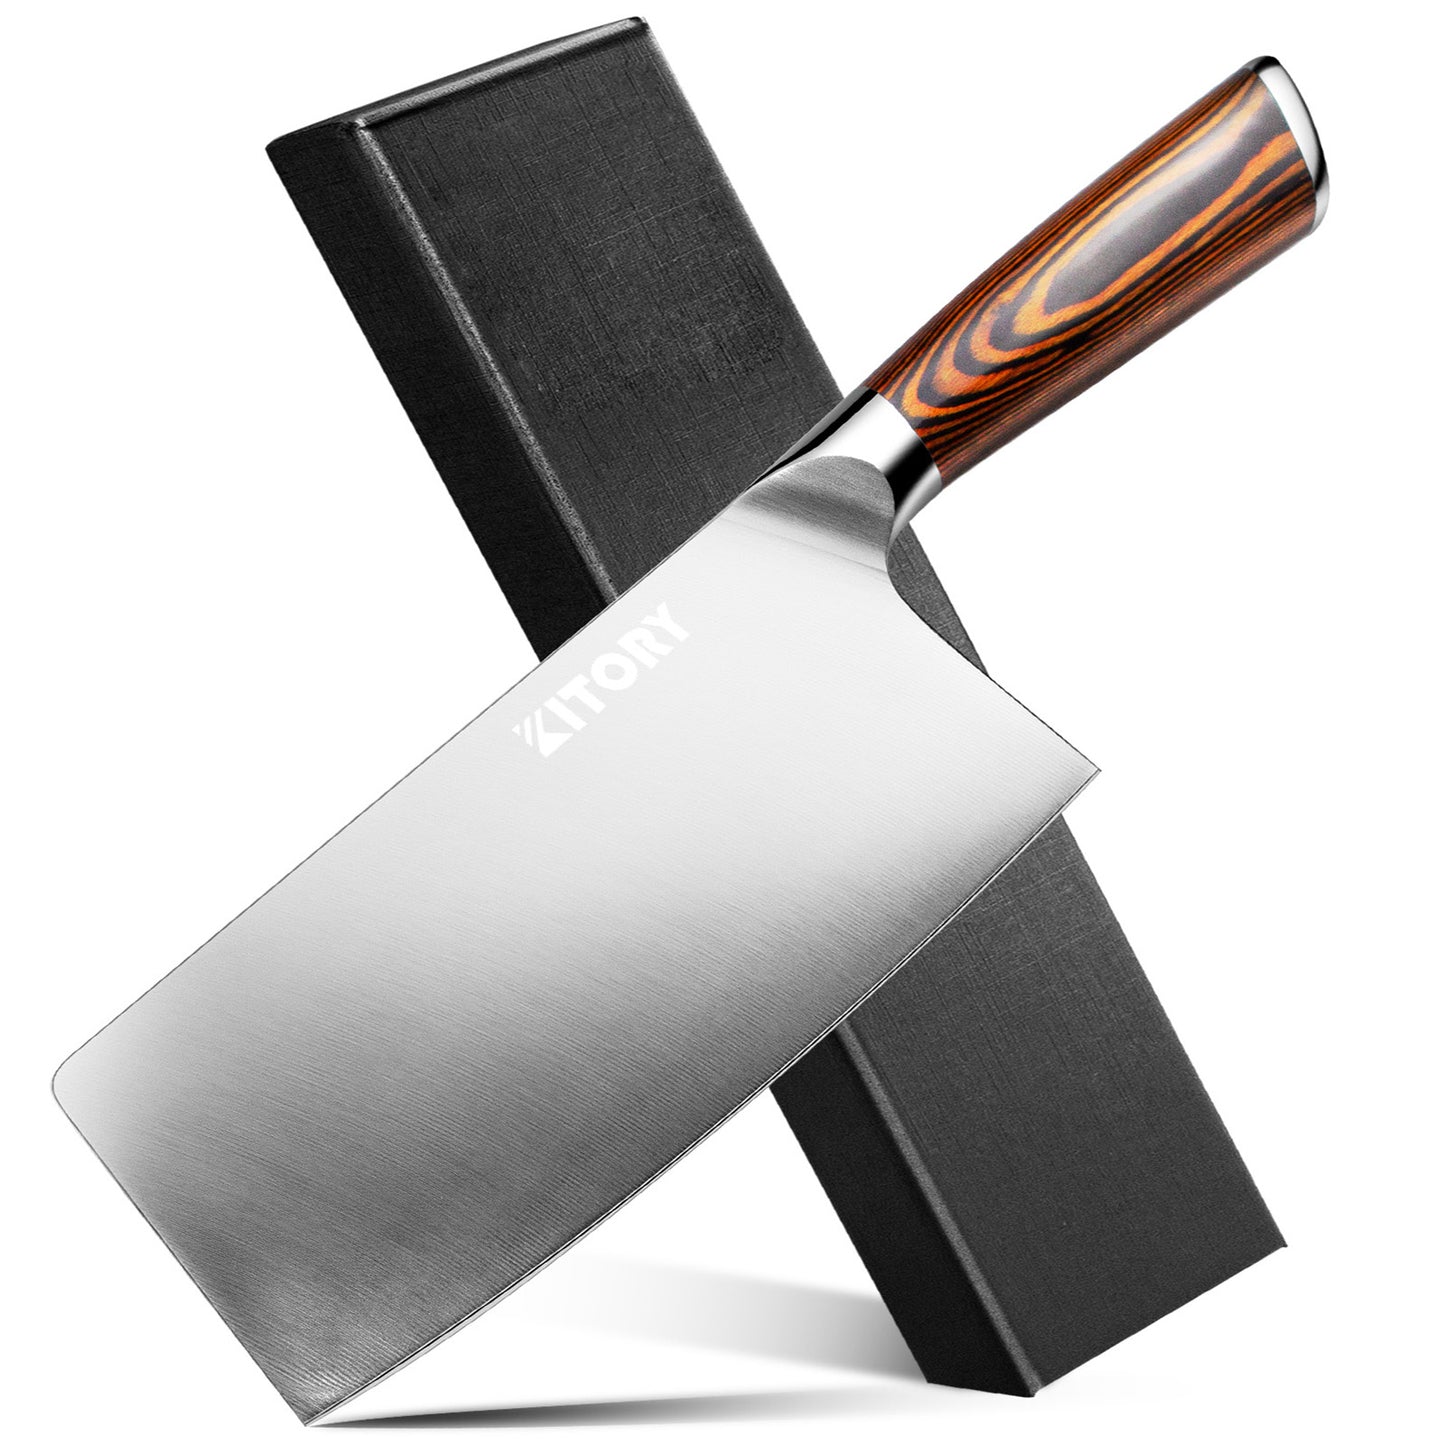 Kitory Meat Cleaver 7 Inch German High Carbon Stainless Steel